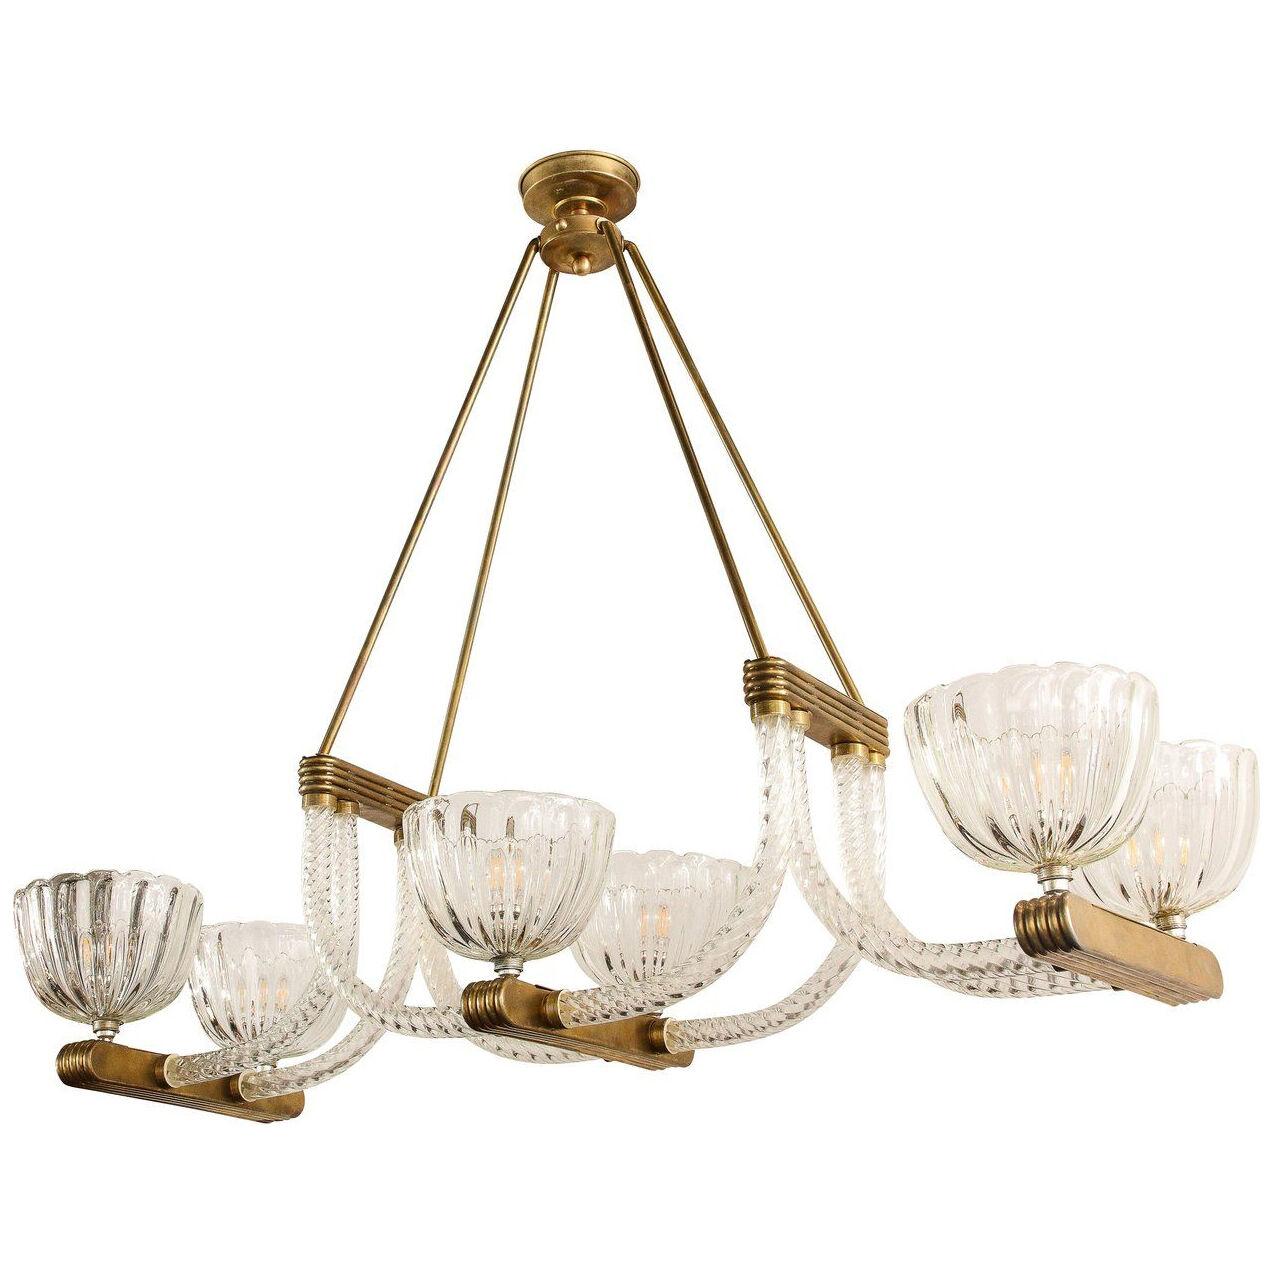 Elegant French Art Deco Chandelier in Brass and Braided Glass by Ercole Barovier